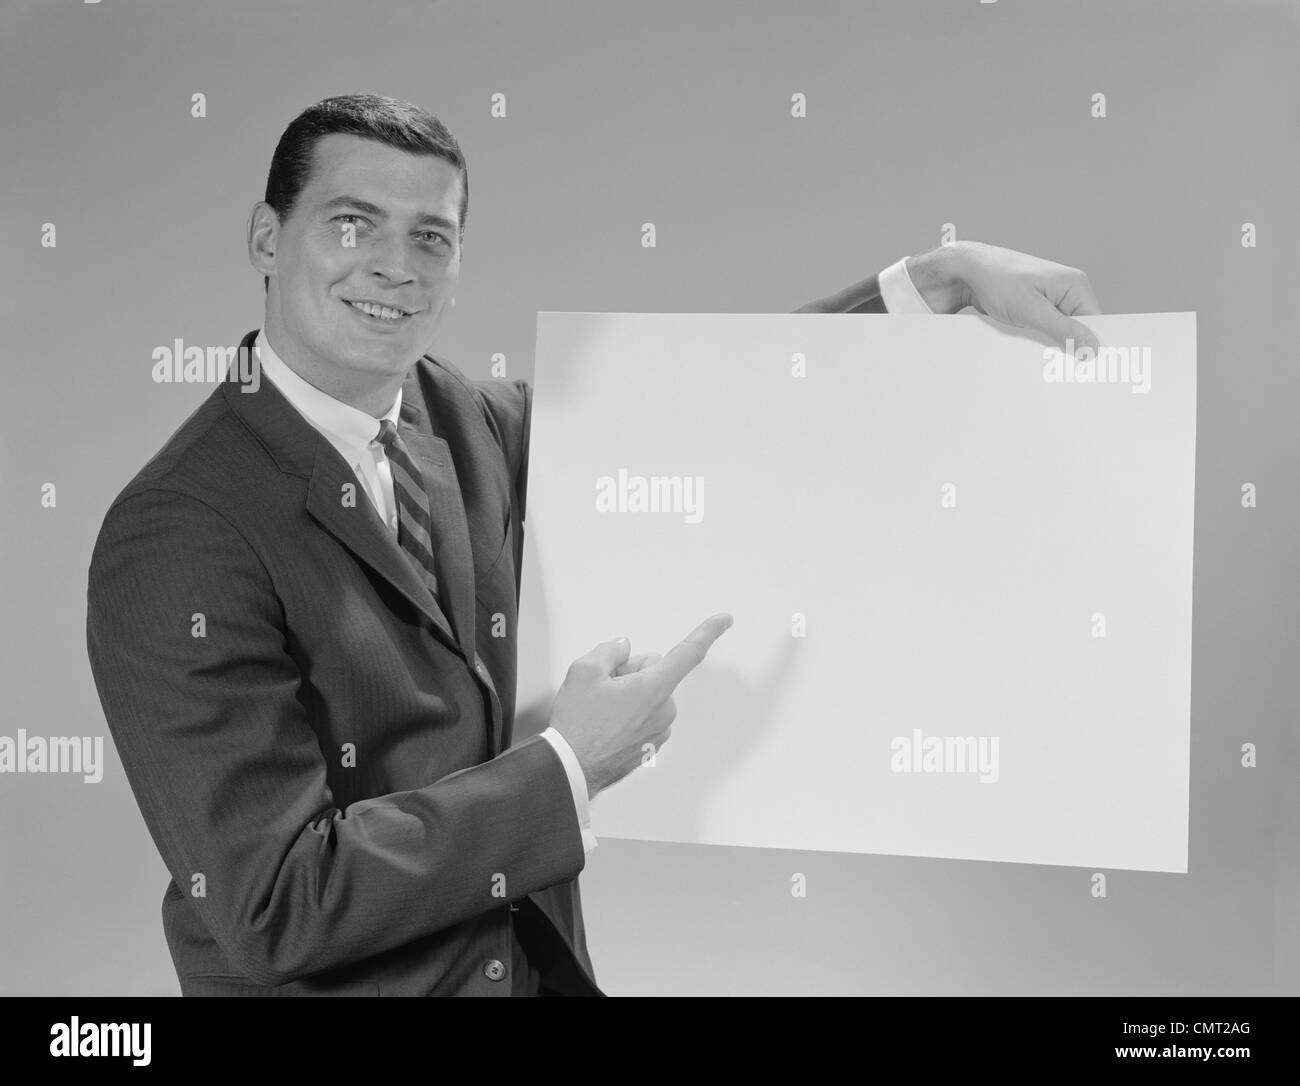 1960 SMILING MAN POINTING DE BLANK POSTER LOOKING AT CAMERA Banque D'Images